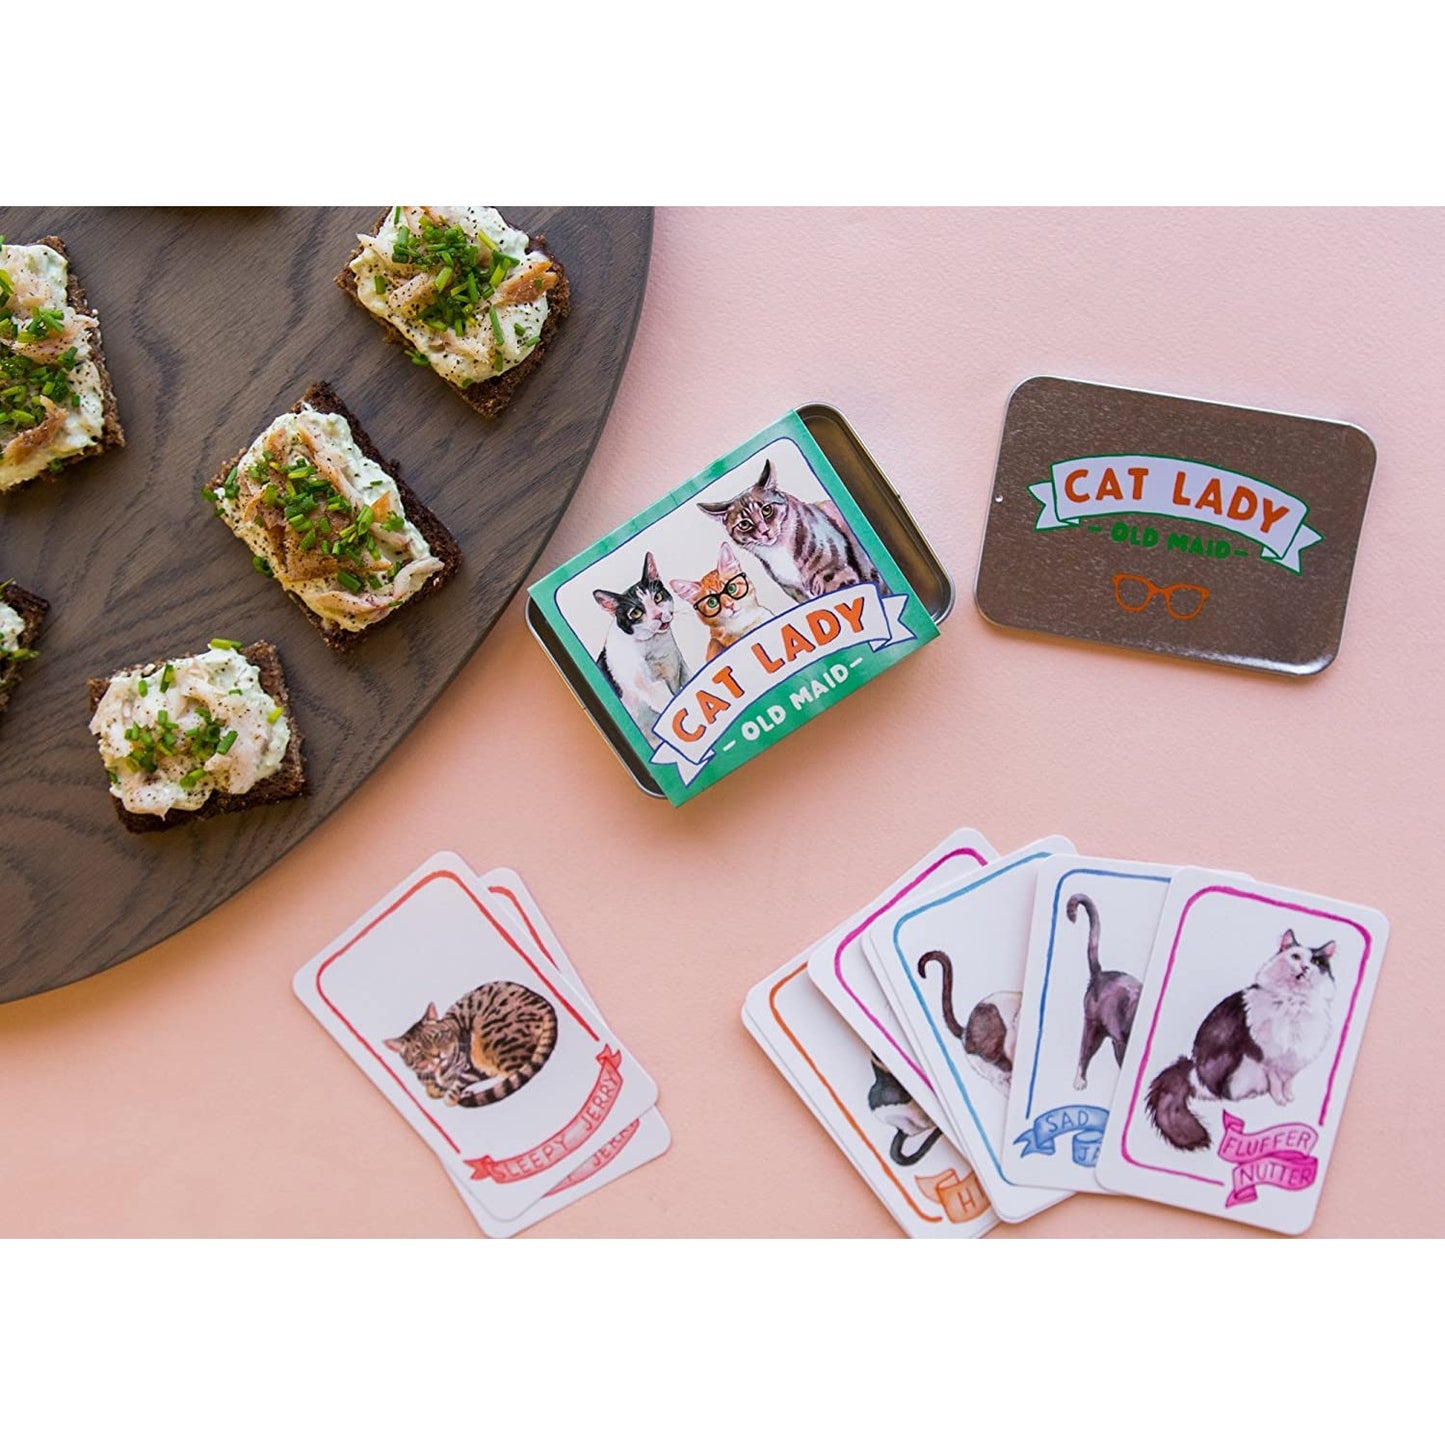 A cat lady old maid game and tin box laid out next to some food on a platter.